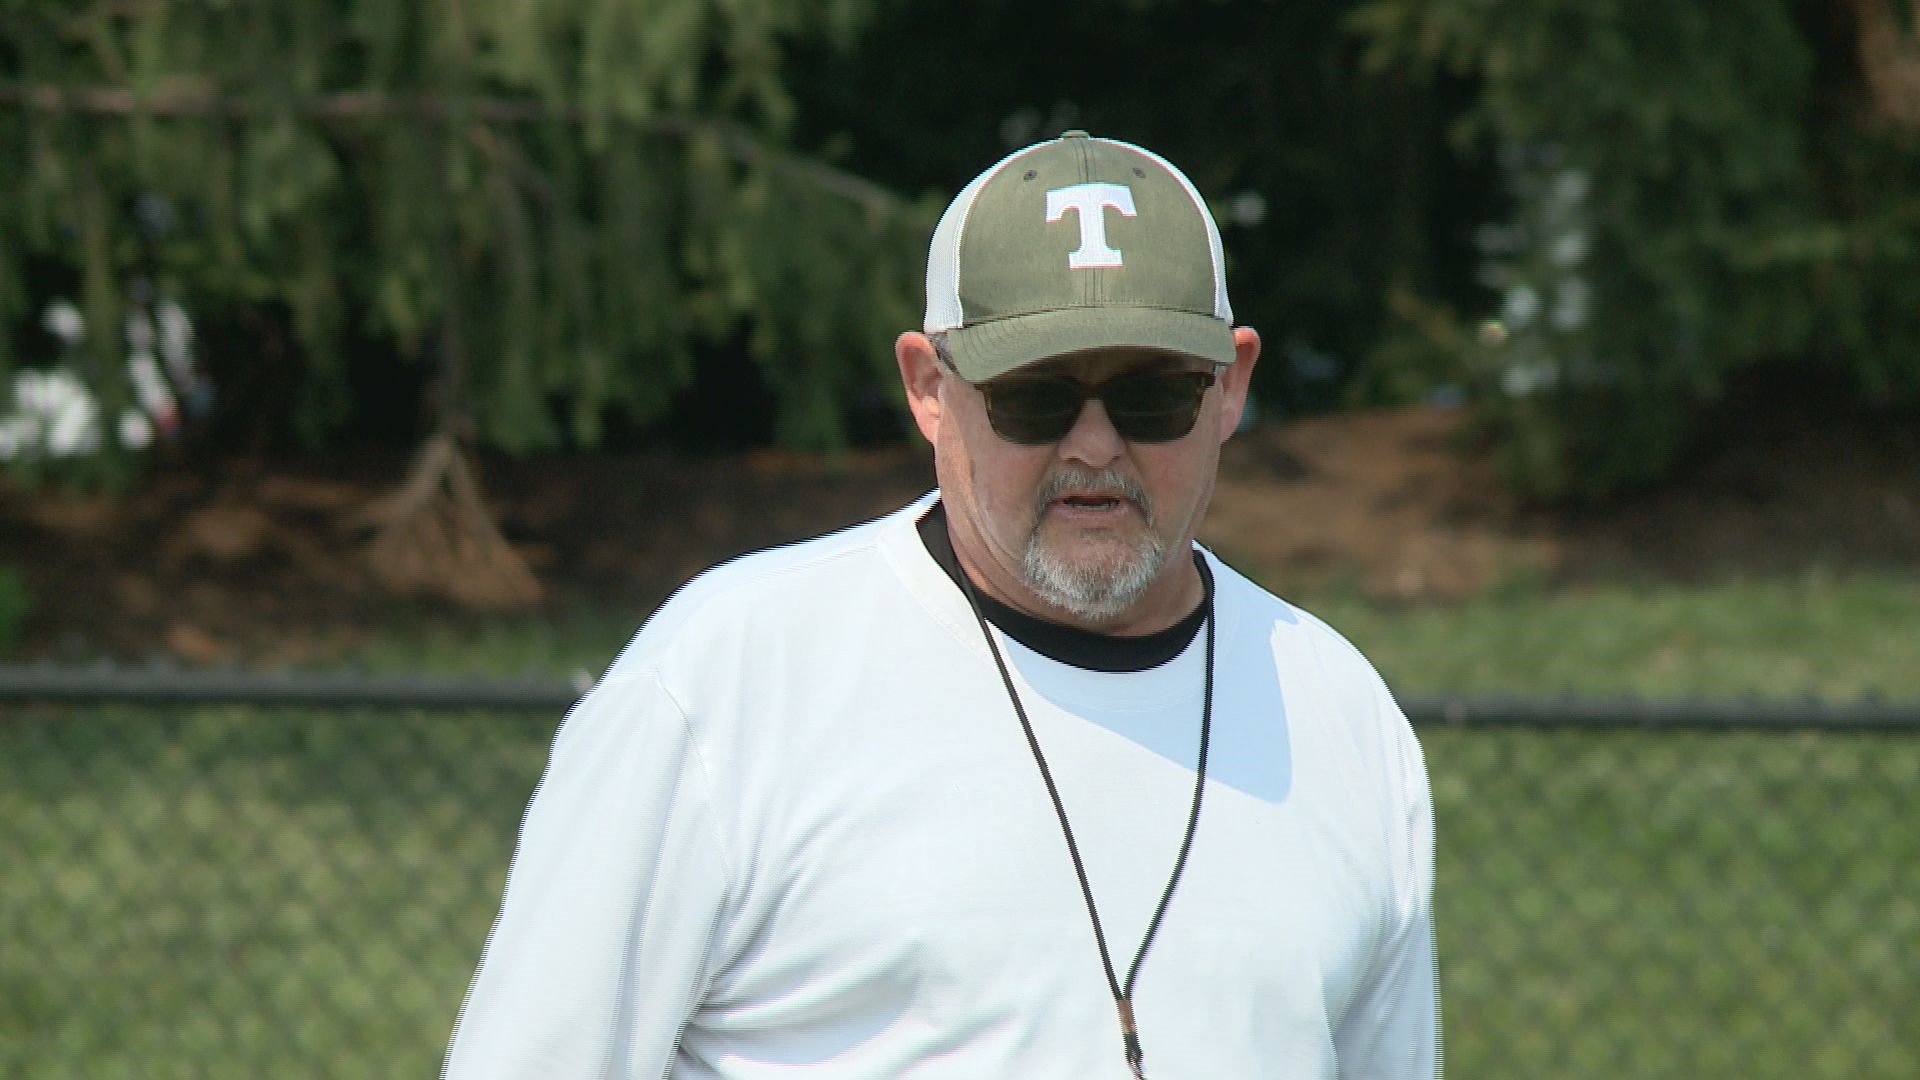 Former Shamrock assistant coach Jay Cobb is now the program's head coach after Hall of Famer Bob Beatty retired.